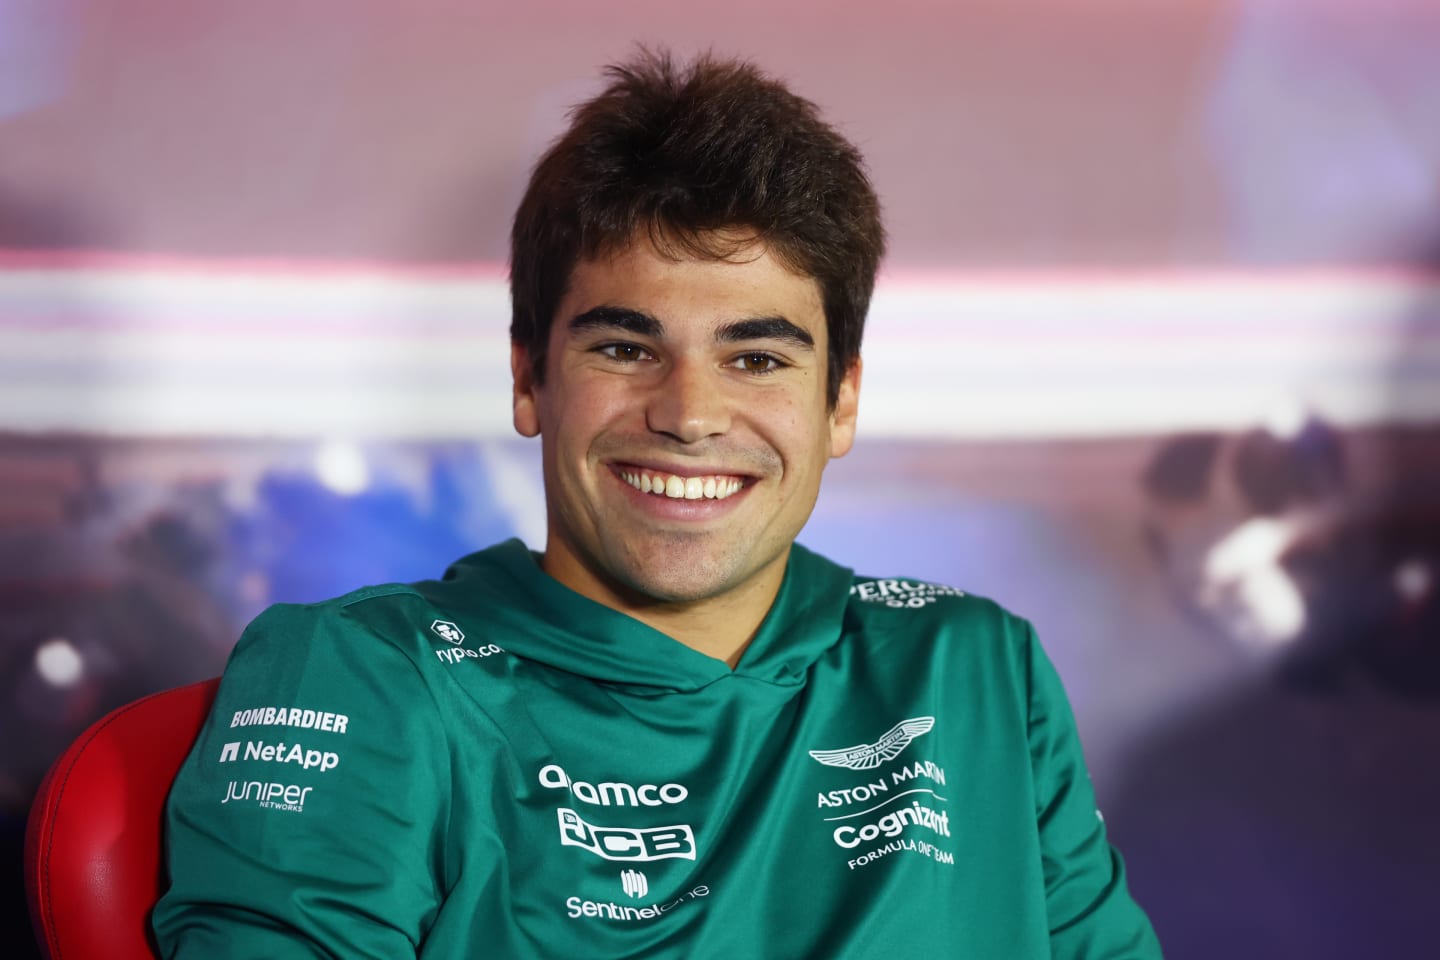 ZANDVOORT, NETHERLANDS - SEPTEMBER 01: Lance Stroll of Canada and Aston Martin F1 Team attends the Drivers Press Conference during previews ahead of the F1 Grand Prix of The Netherlands at Circuit Zandvoort on September 01, 2022 in Zandvoort, Netherlands. (Photo by Lars Baron/Getty Images)